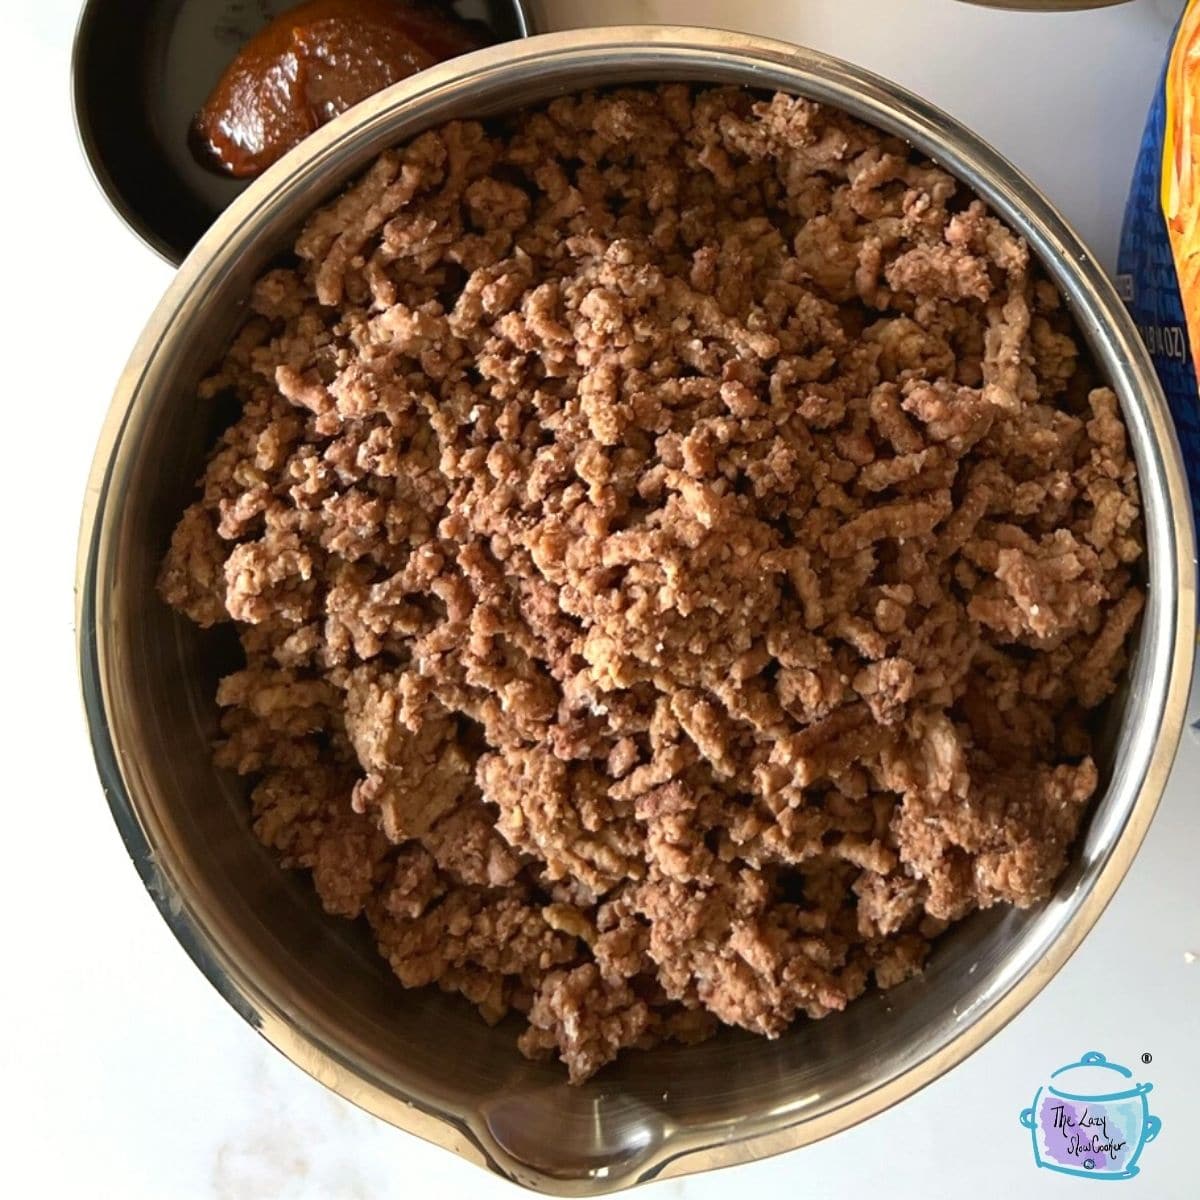 Is Raw Ground Beef That's Turned Brown Still Safe to Use?